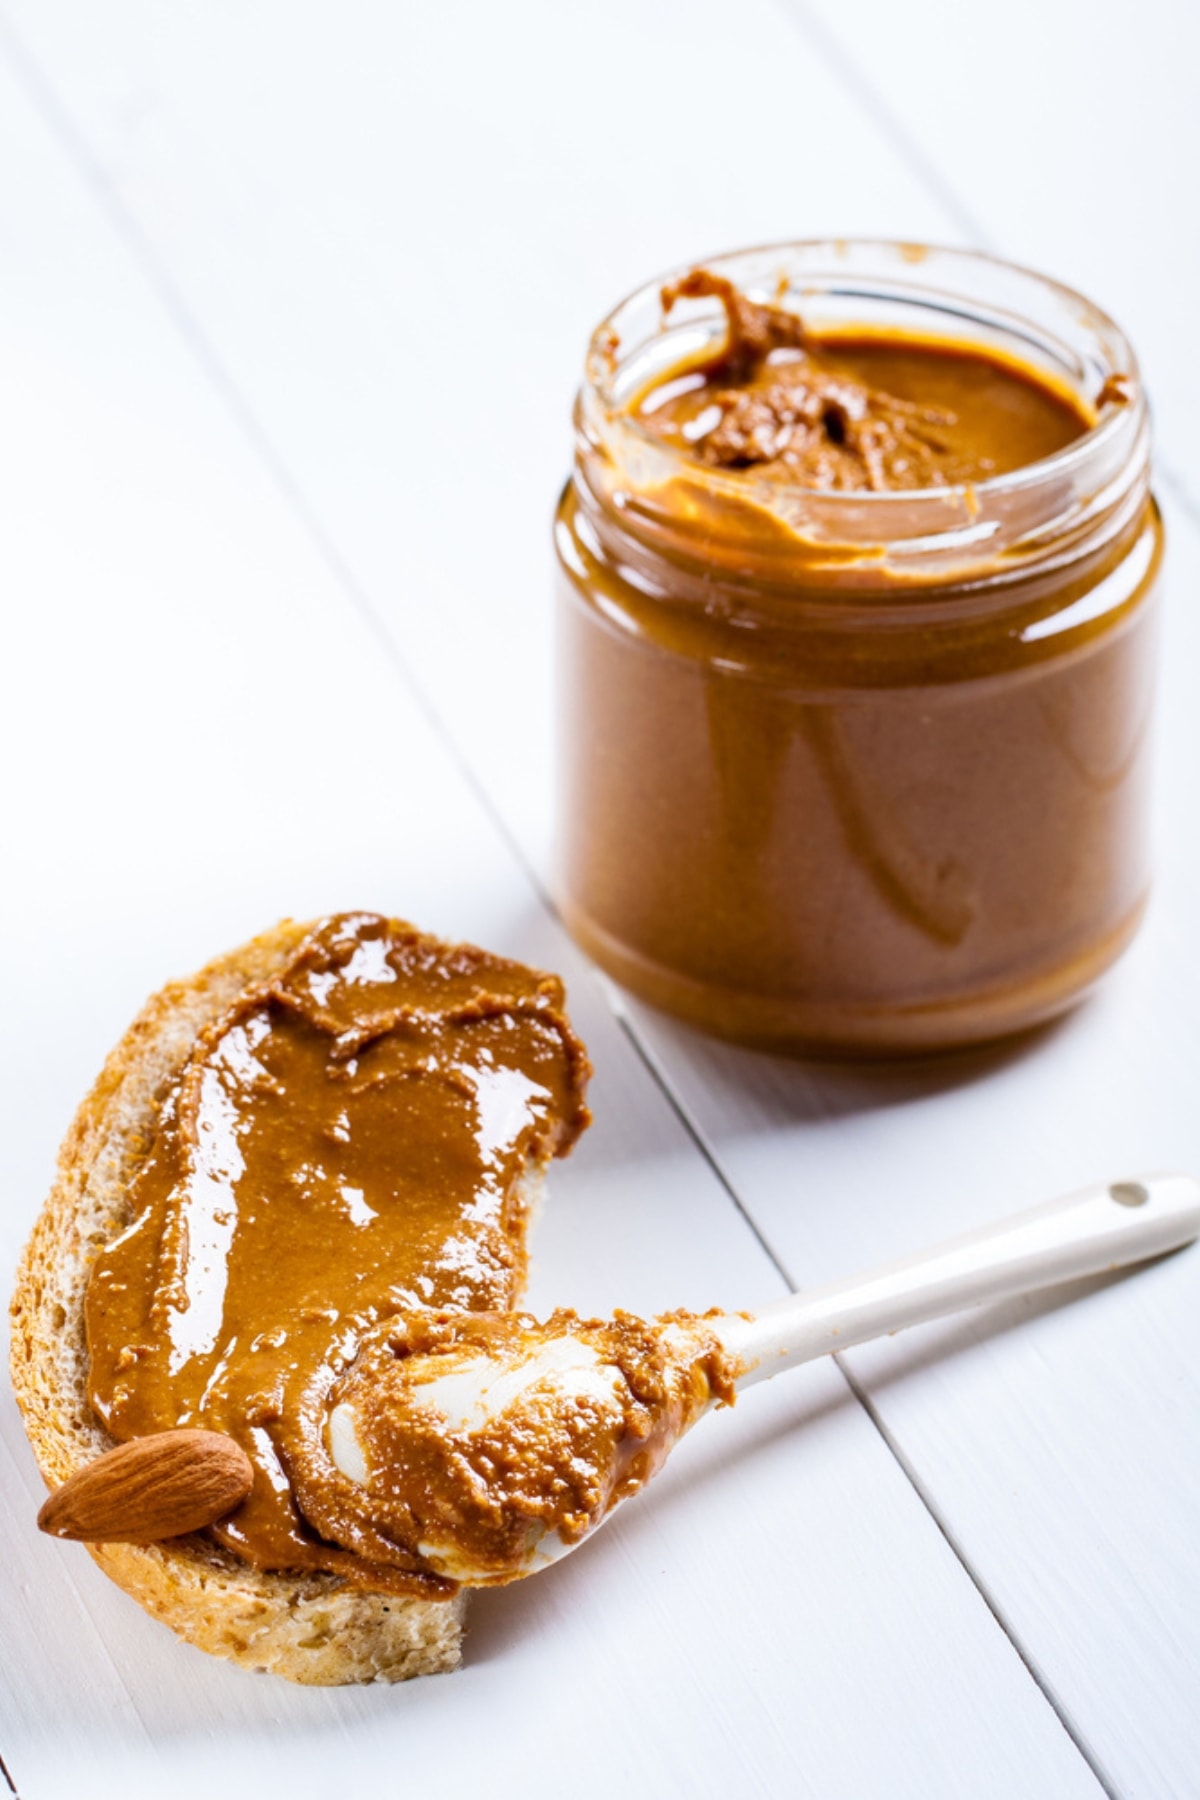 How to Make Almond Butter at Home featuring Homemade Almond Butter in a Jar and Almond Butter Spread on Slice of Bread